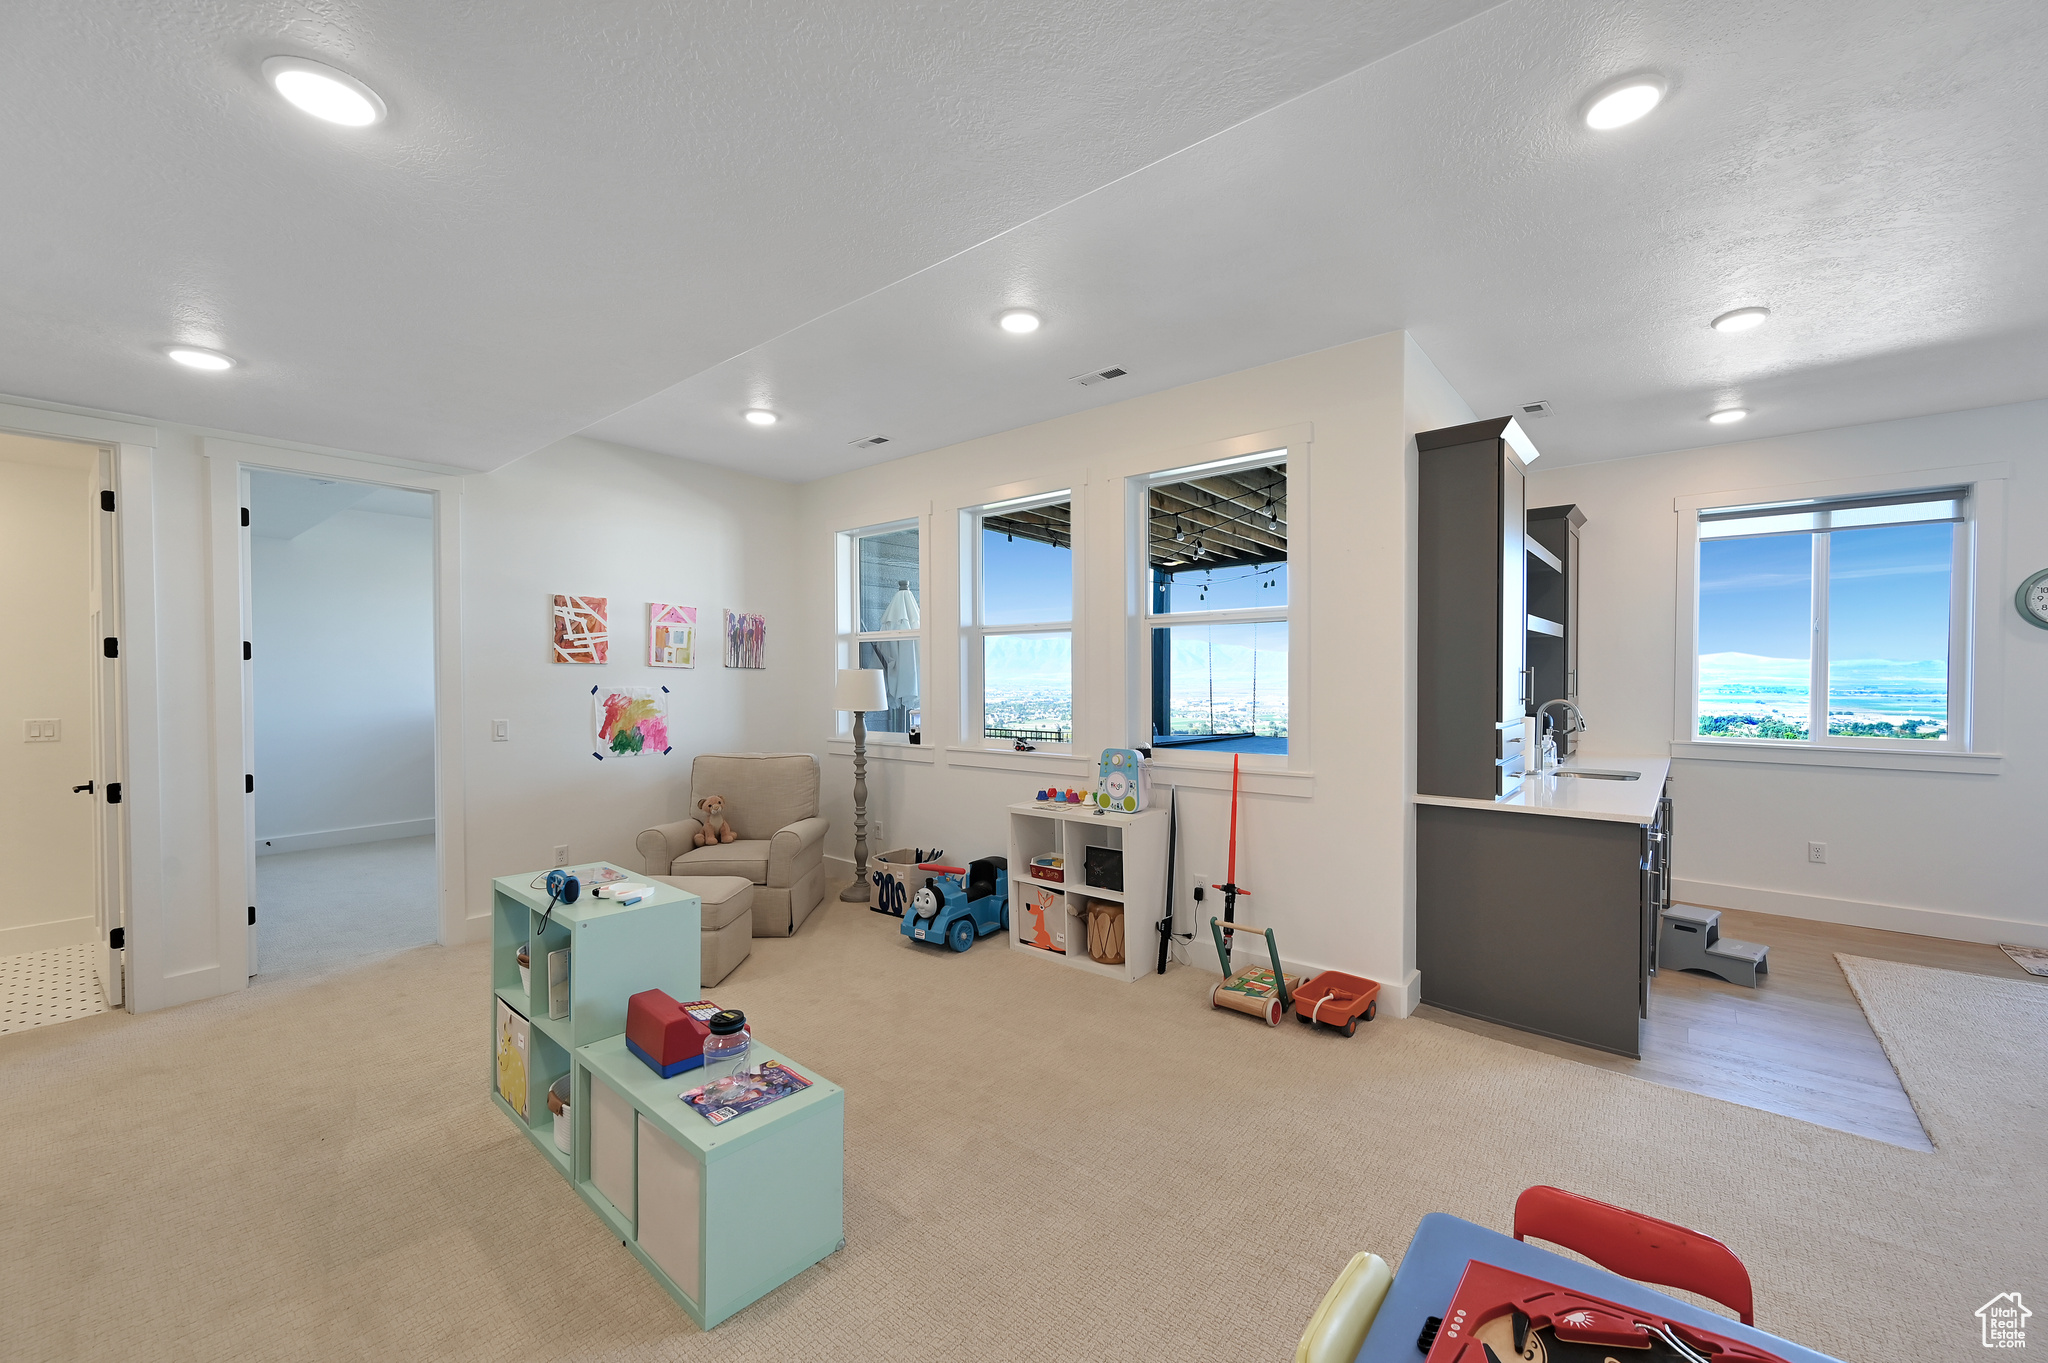 Playroom with light carpet and sink